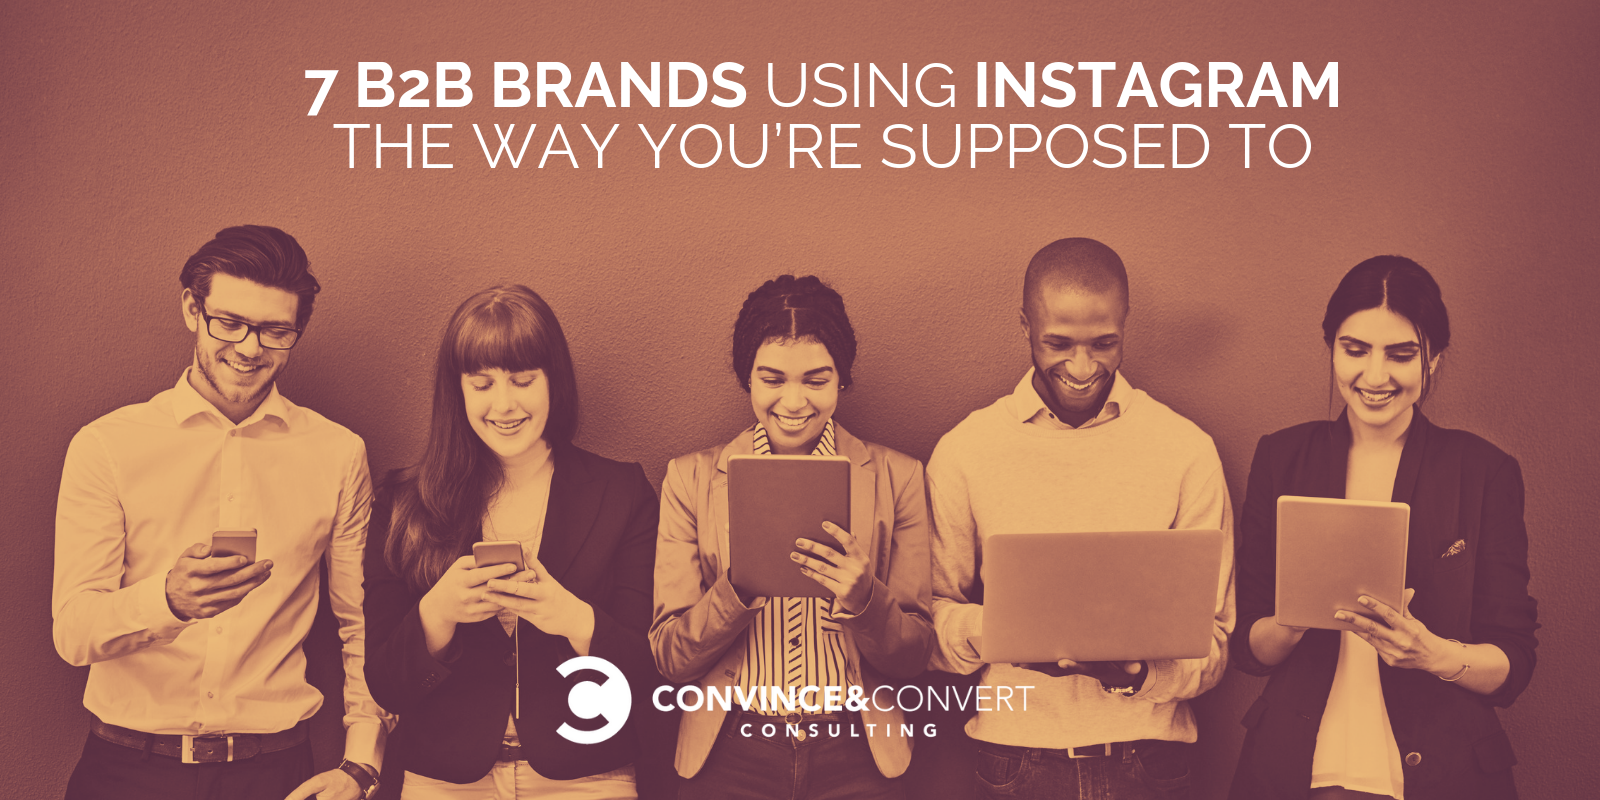 7 B2B Brands Using Instagram the Way You’re Supposed To